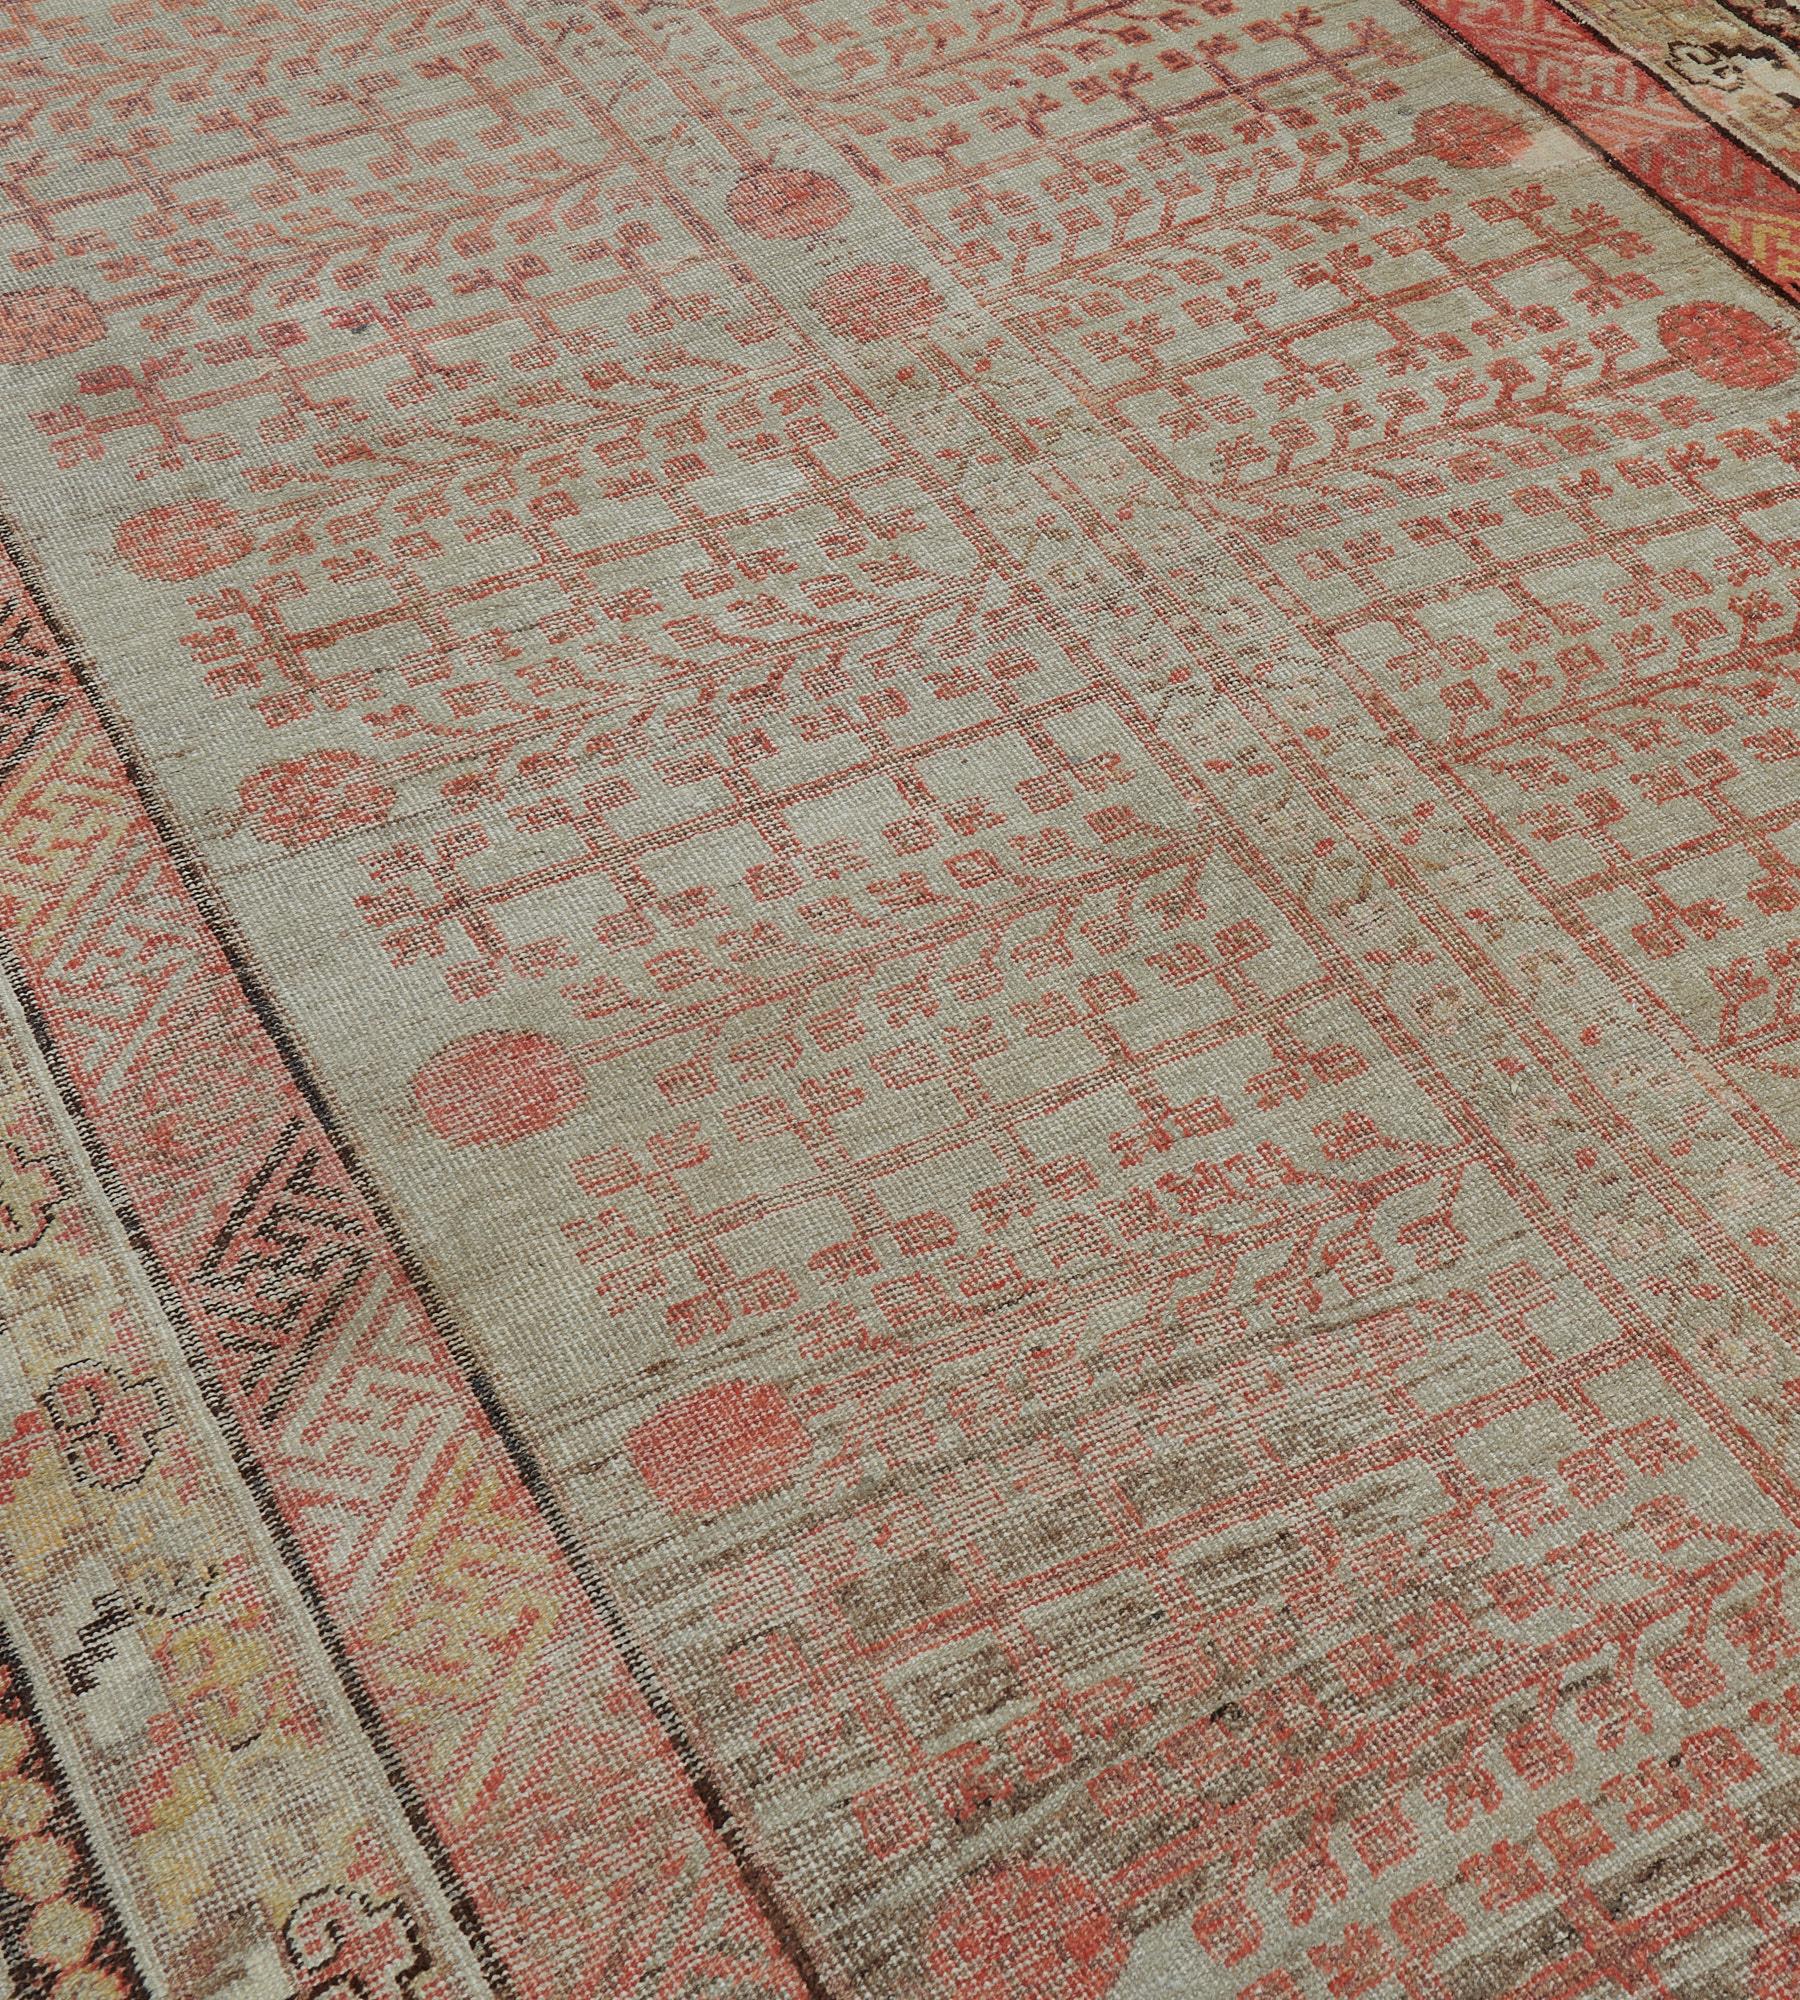 This antique, circa 1880, Khotan rug has an eau-de-nil field with an overall design of light terracotta-red vertical panel containing a central pole-motif issuing from a small vase, a delicate floral vine terminating with a pomegranate, the panel